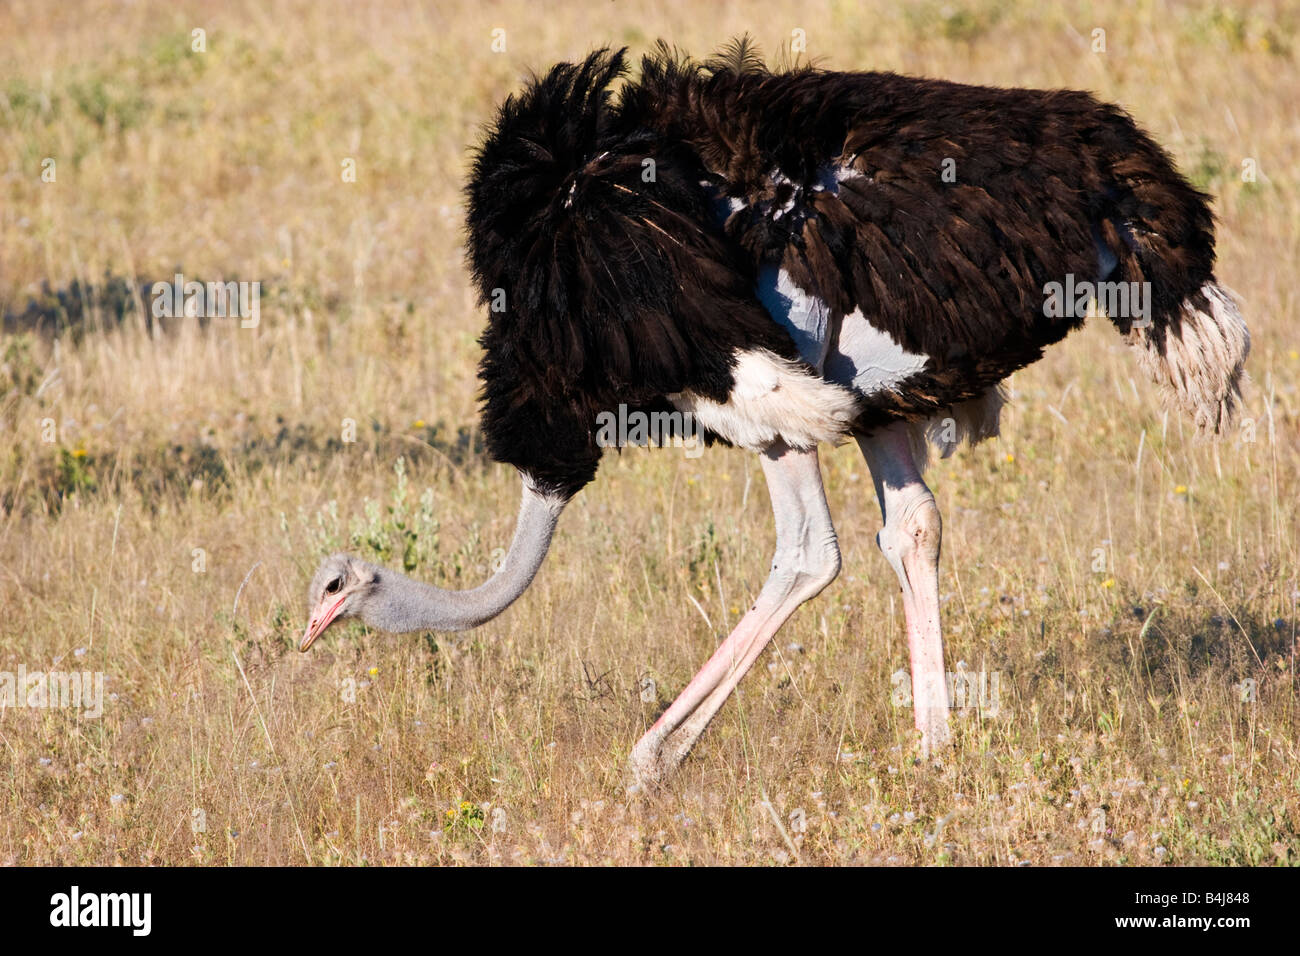 Ostriches in Namibia Stock Photo